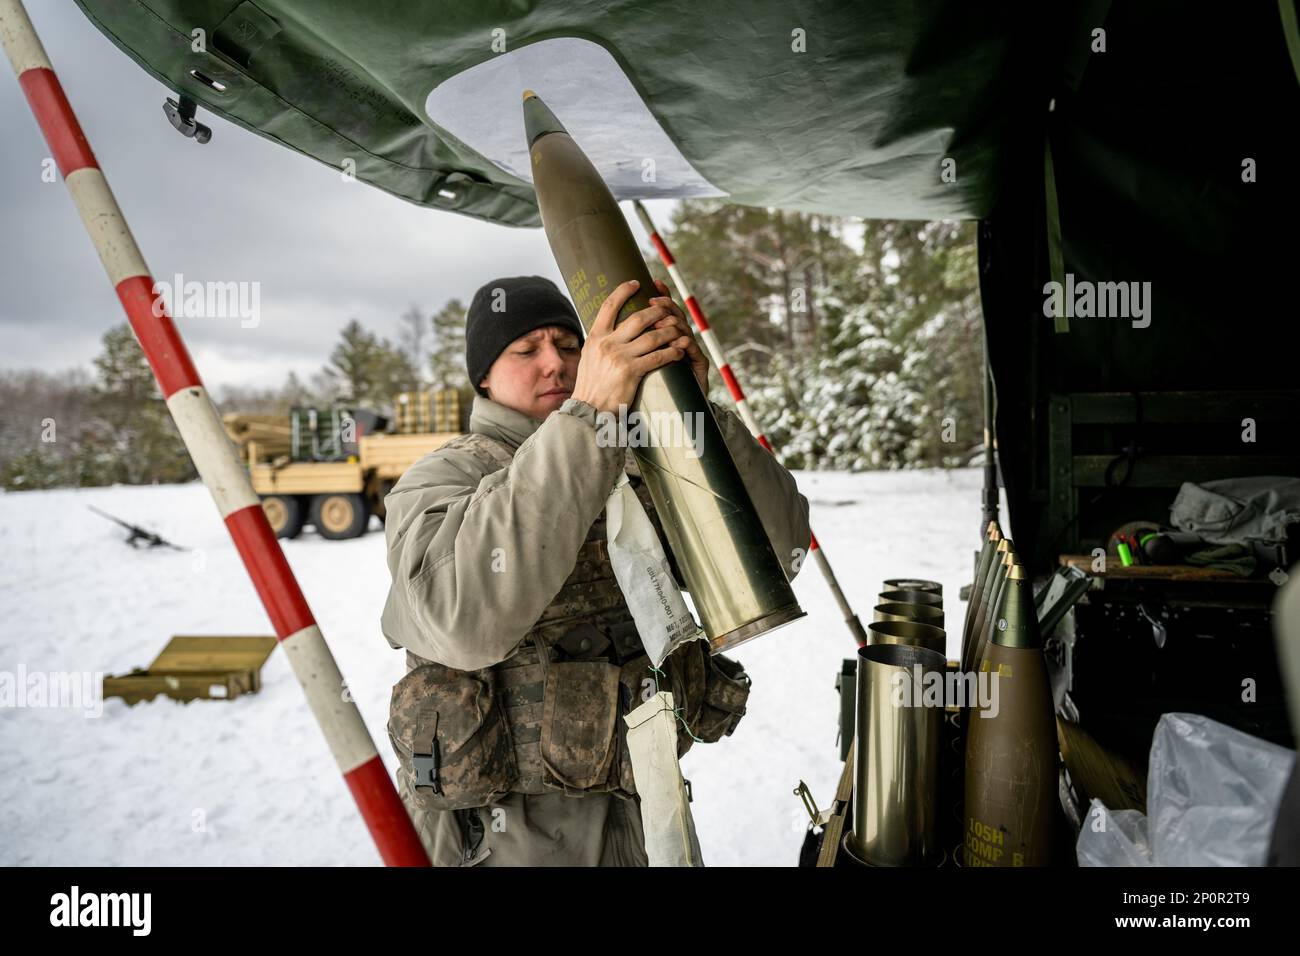 Army Cpl. Brady Kielpikowski, 1-120th Field Artillery Regiment, assembles a 105mm High Explosive shell to be used with the M119 howitzer during Northern Strike 23-1, Jan. 23, 2023, at Camp Grayling, Mich. Units that participate in Northern Strike’s winter iteration build readiness by conducting joint, cold-weather training designed to meet objectives of the Department of Defense’s Arctic Strategy. Stock Photo